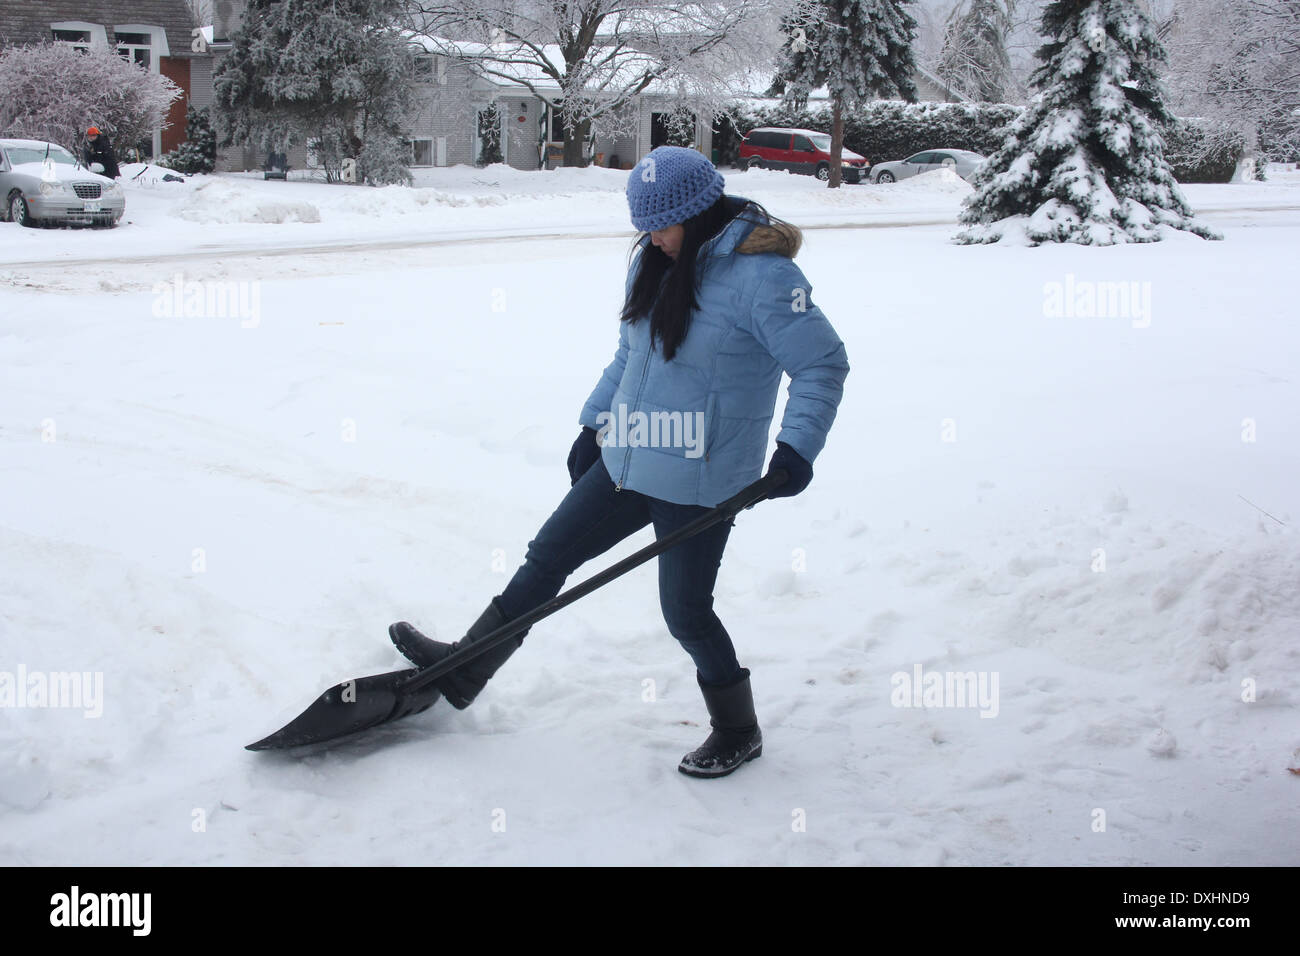 Lady shoveling snow off sidewalk after a snowfall. Stock Photo